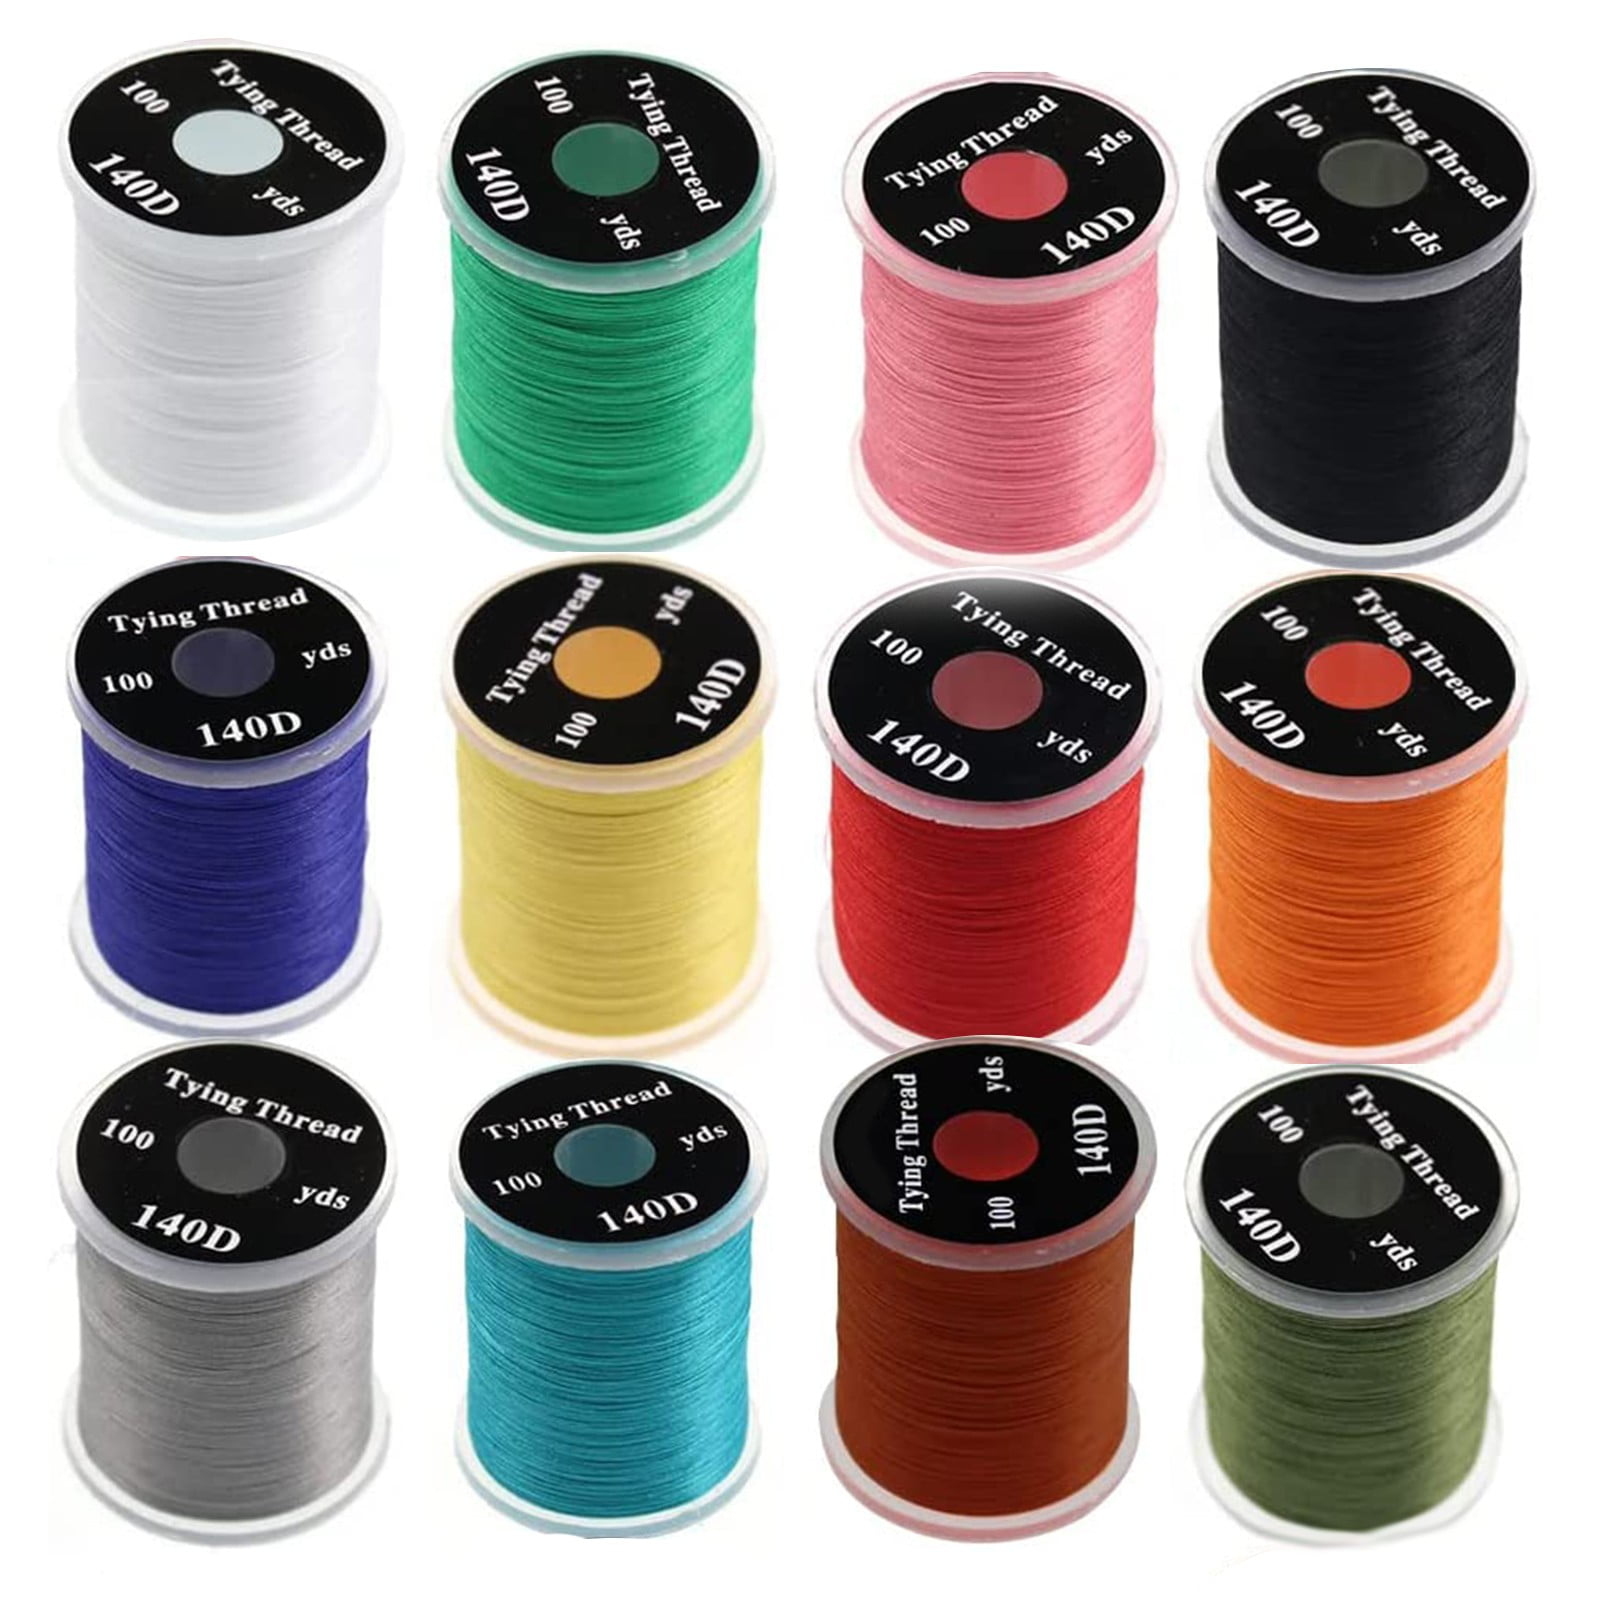 140d Fly Tying Thread Kit Material Tie Dry Wet Flies Nymph Elastic Wire 